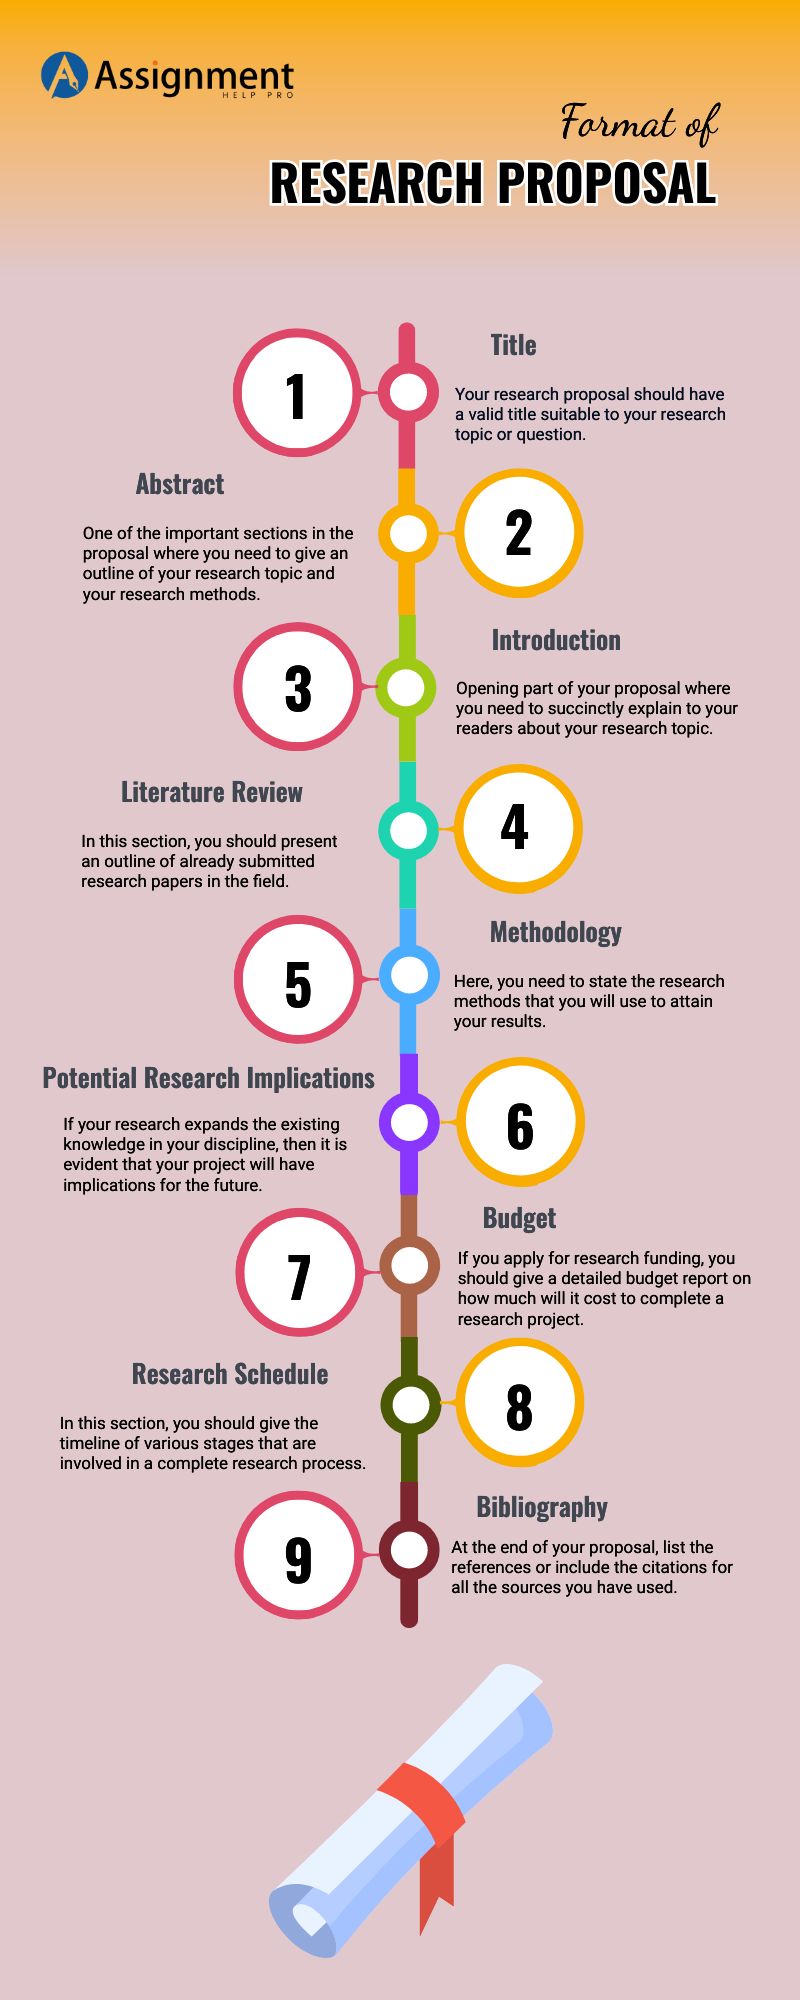 parts of a research proposal explained